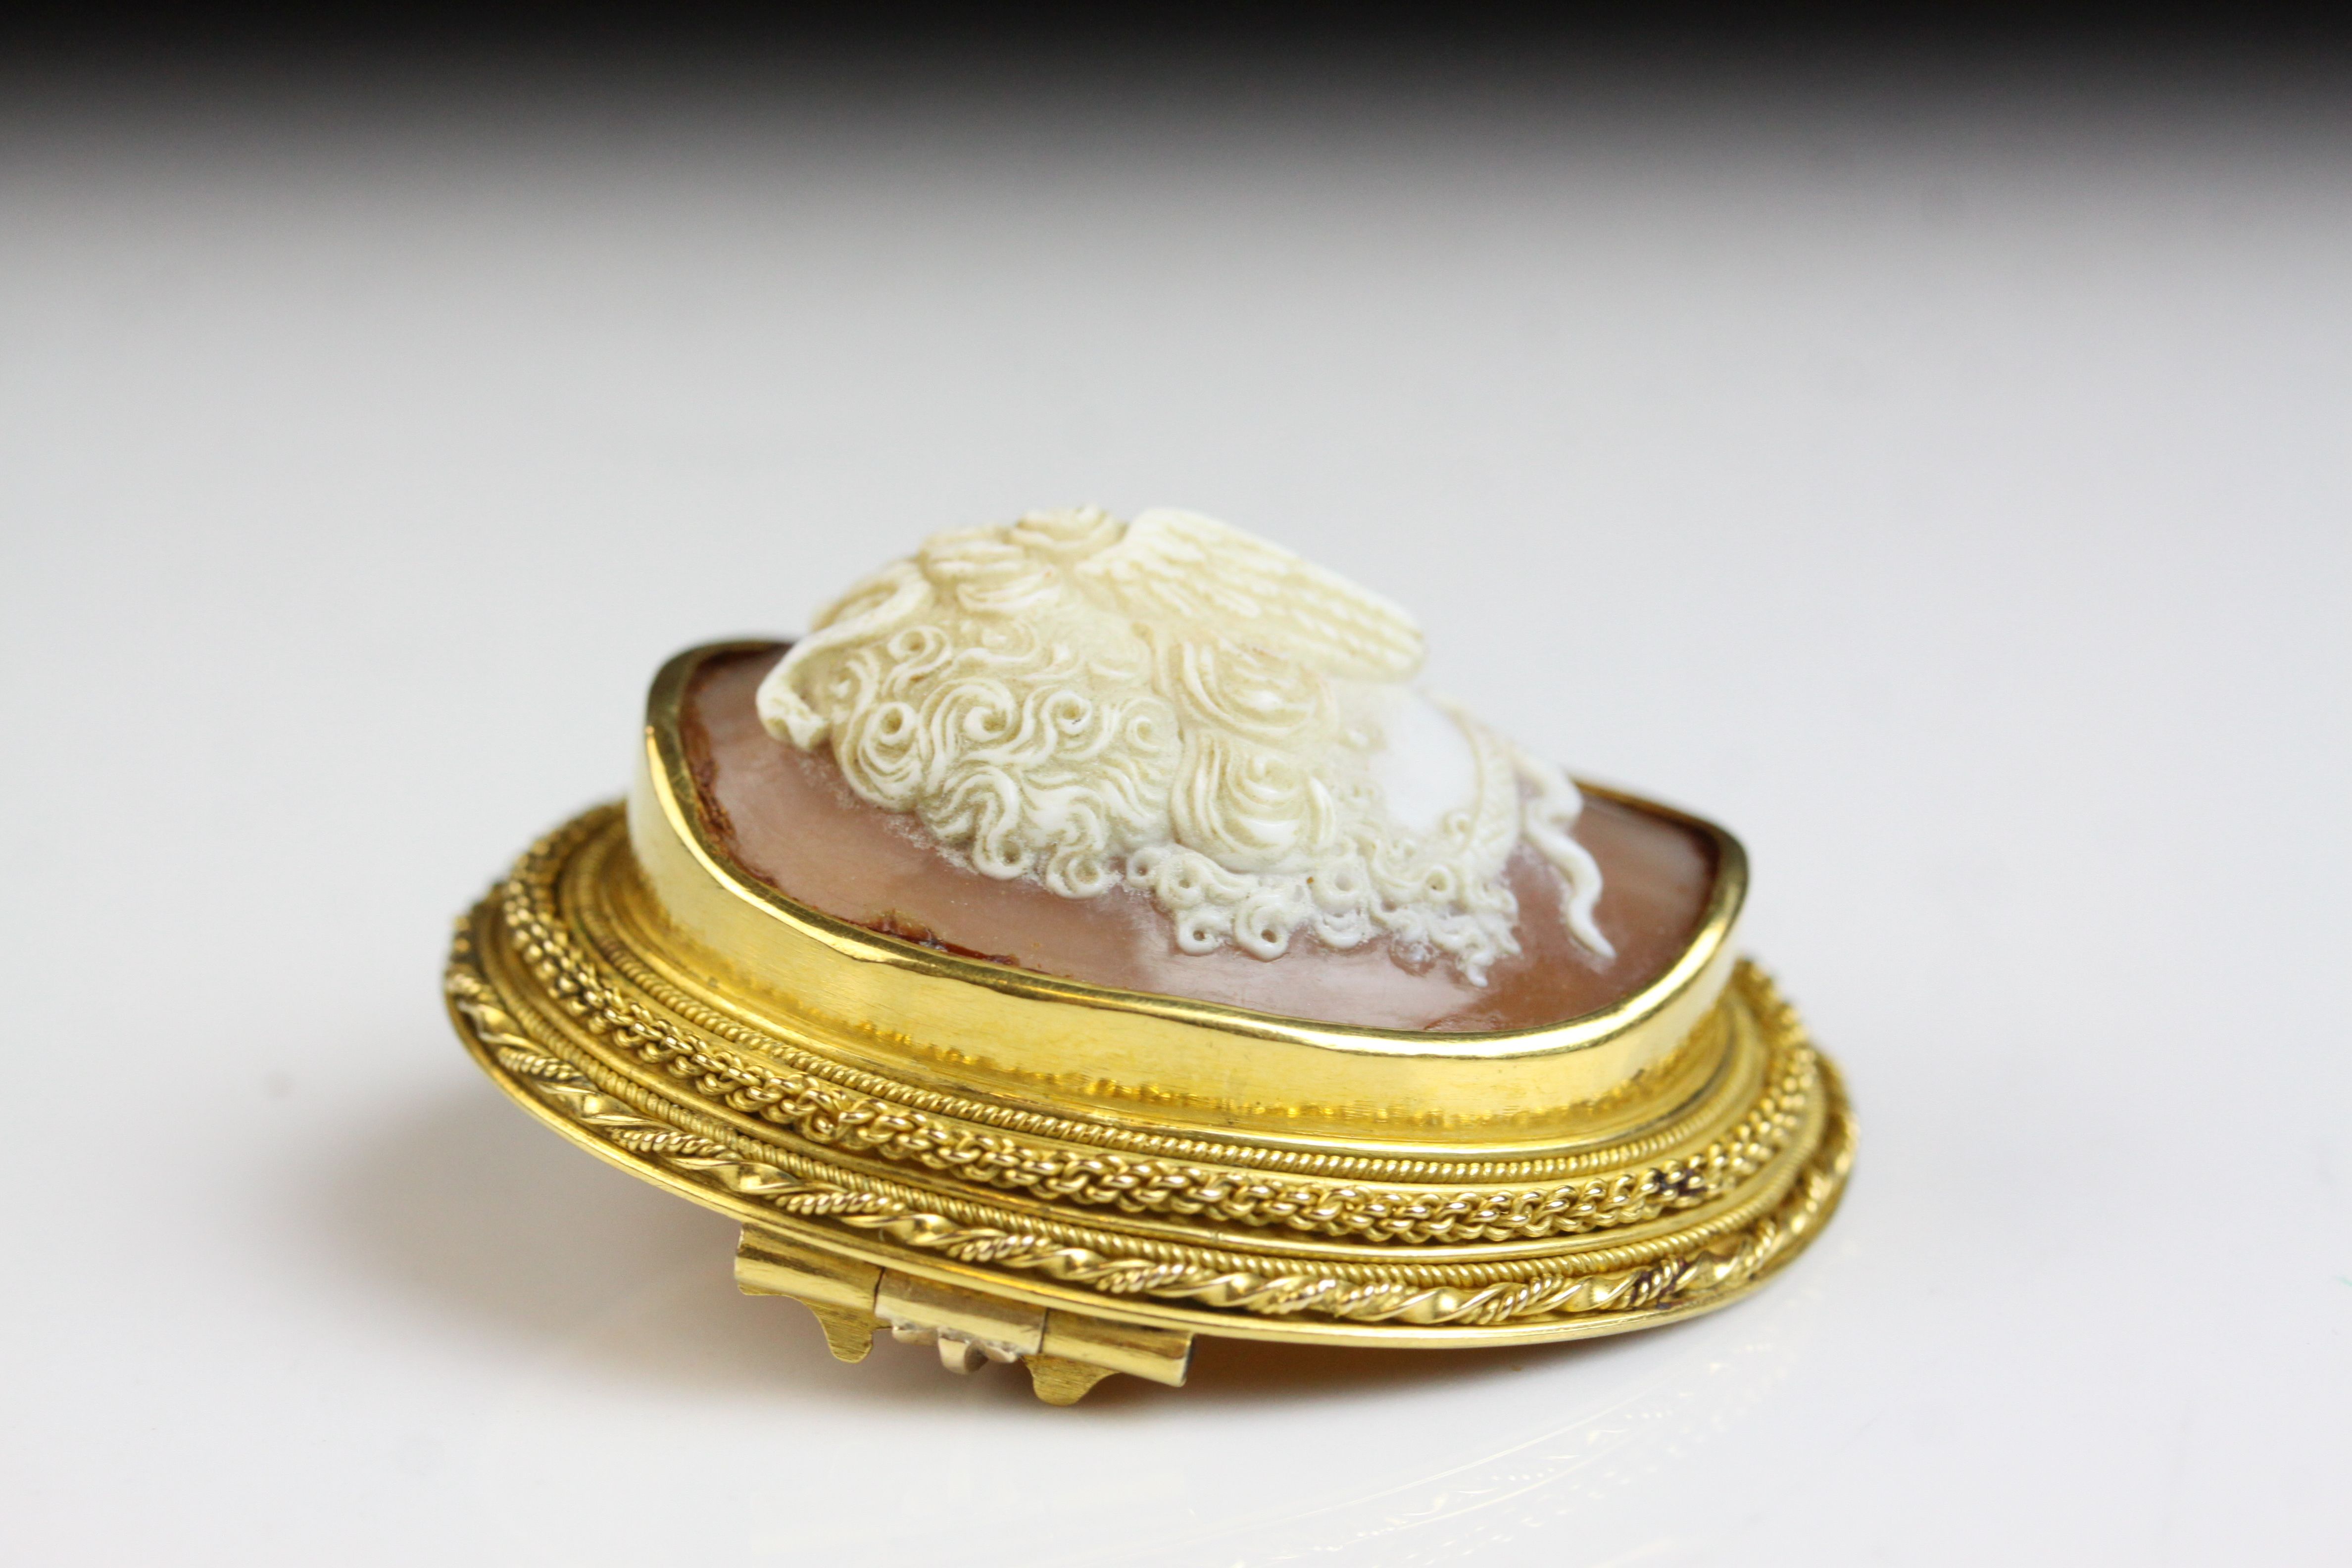 Victorian shell cameo yellow gold brooch depicting Medusa, rub over setting, fancy rope twist and - Image 6 of 6